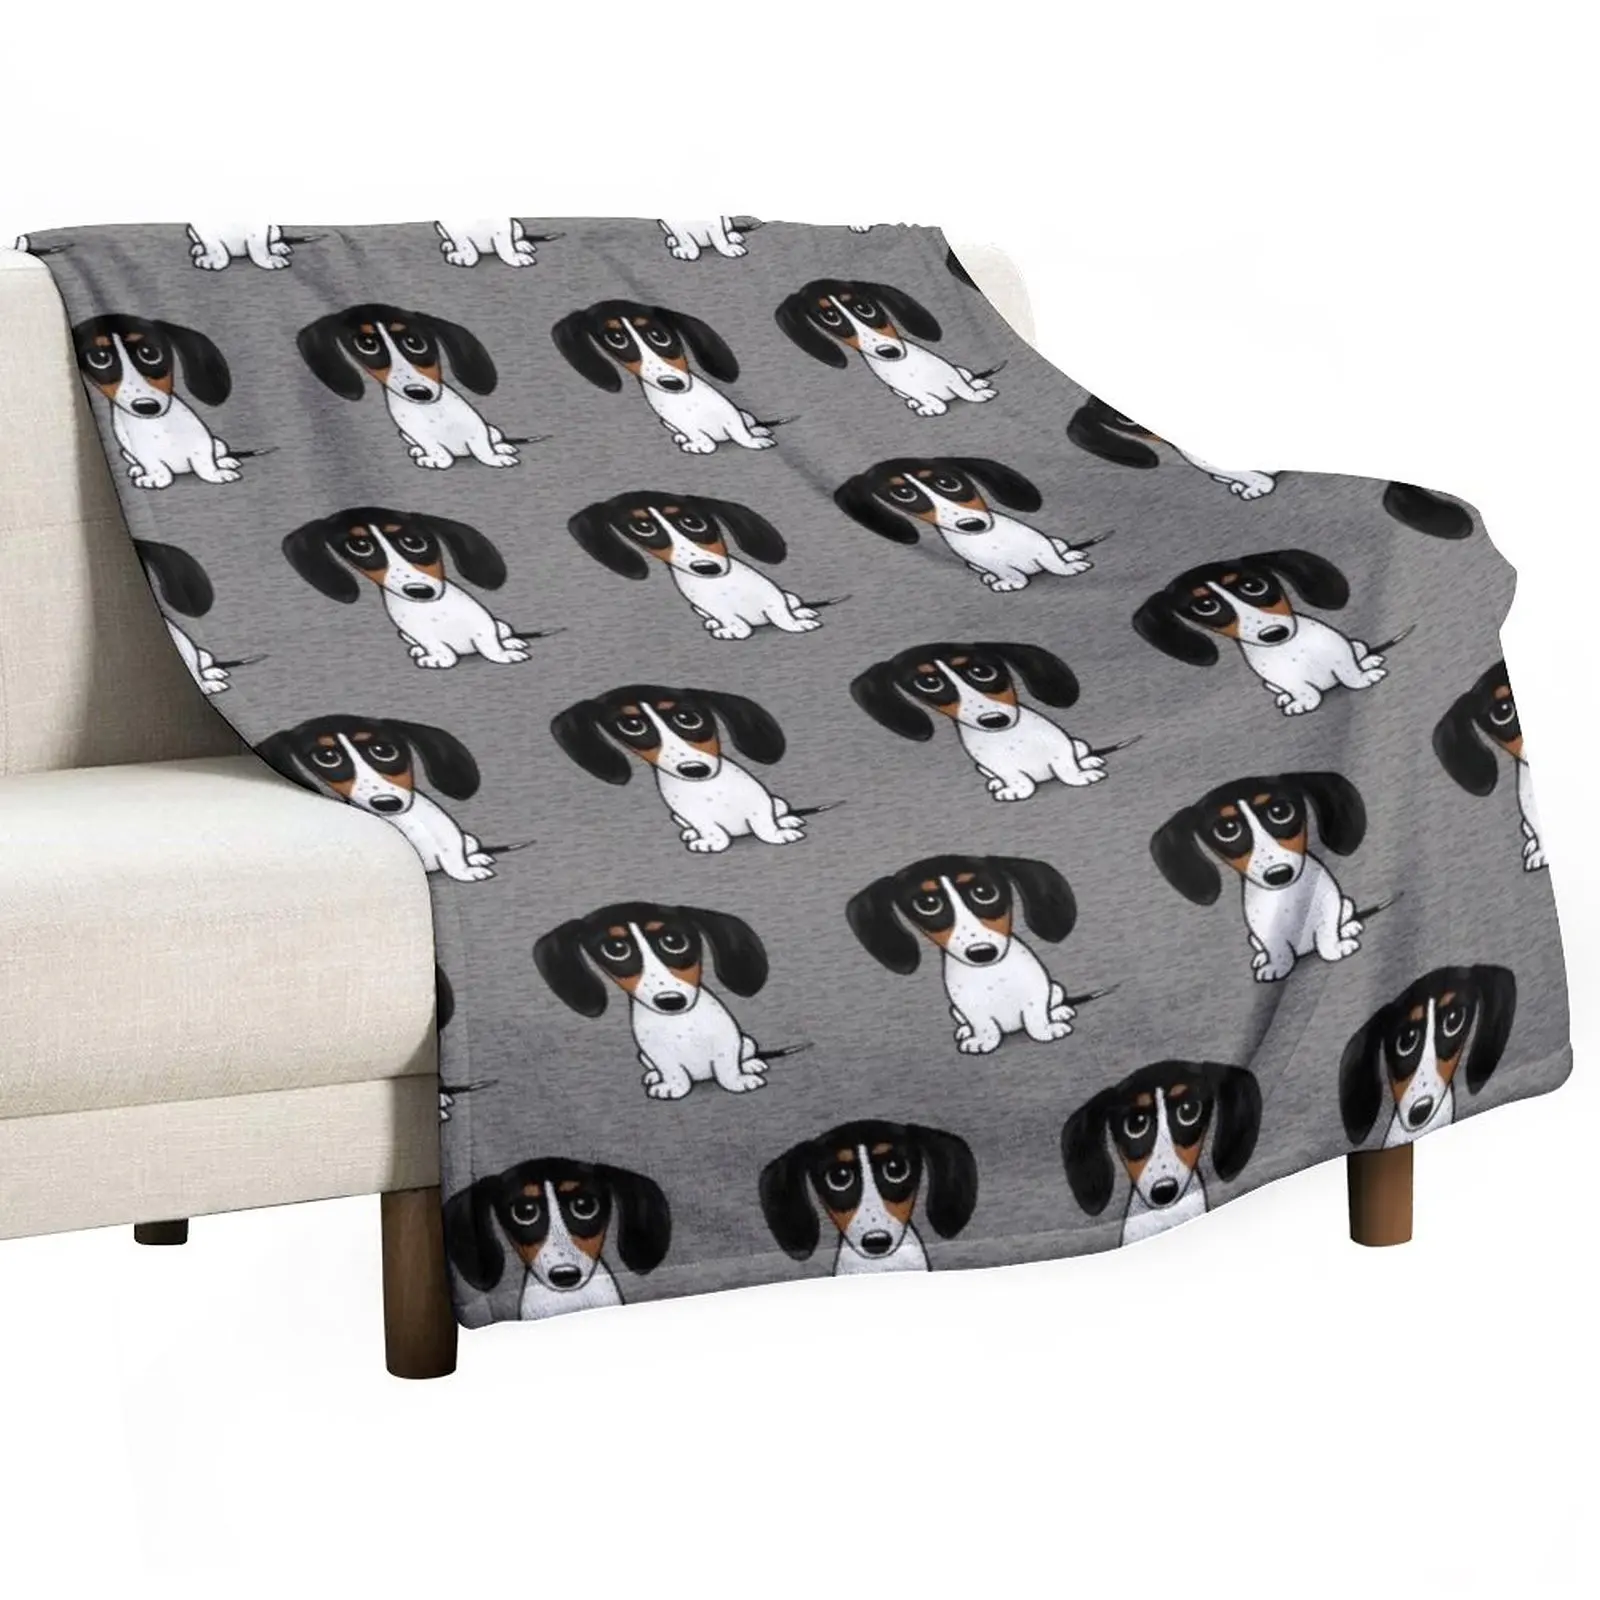 

Piebald Dachshund | Cute Black, Tan and White Wiener Dog Throw Blanket christmas gifts for babies Decorative Beds Blankets